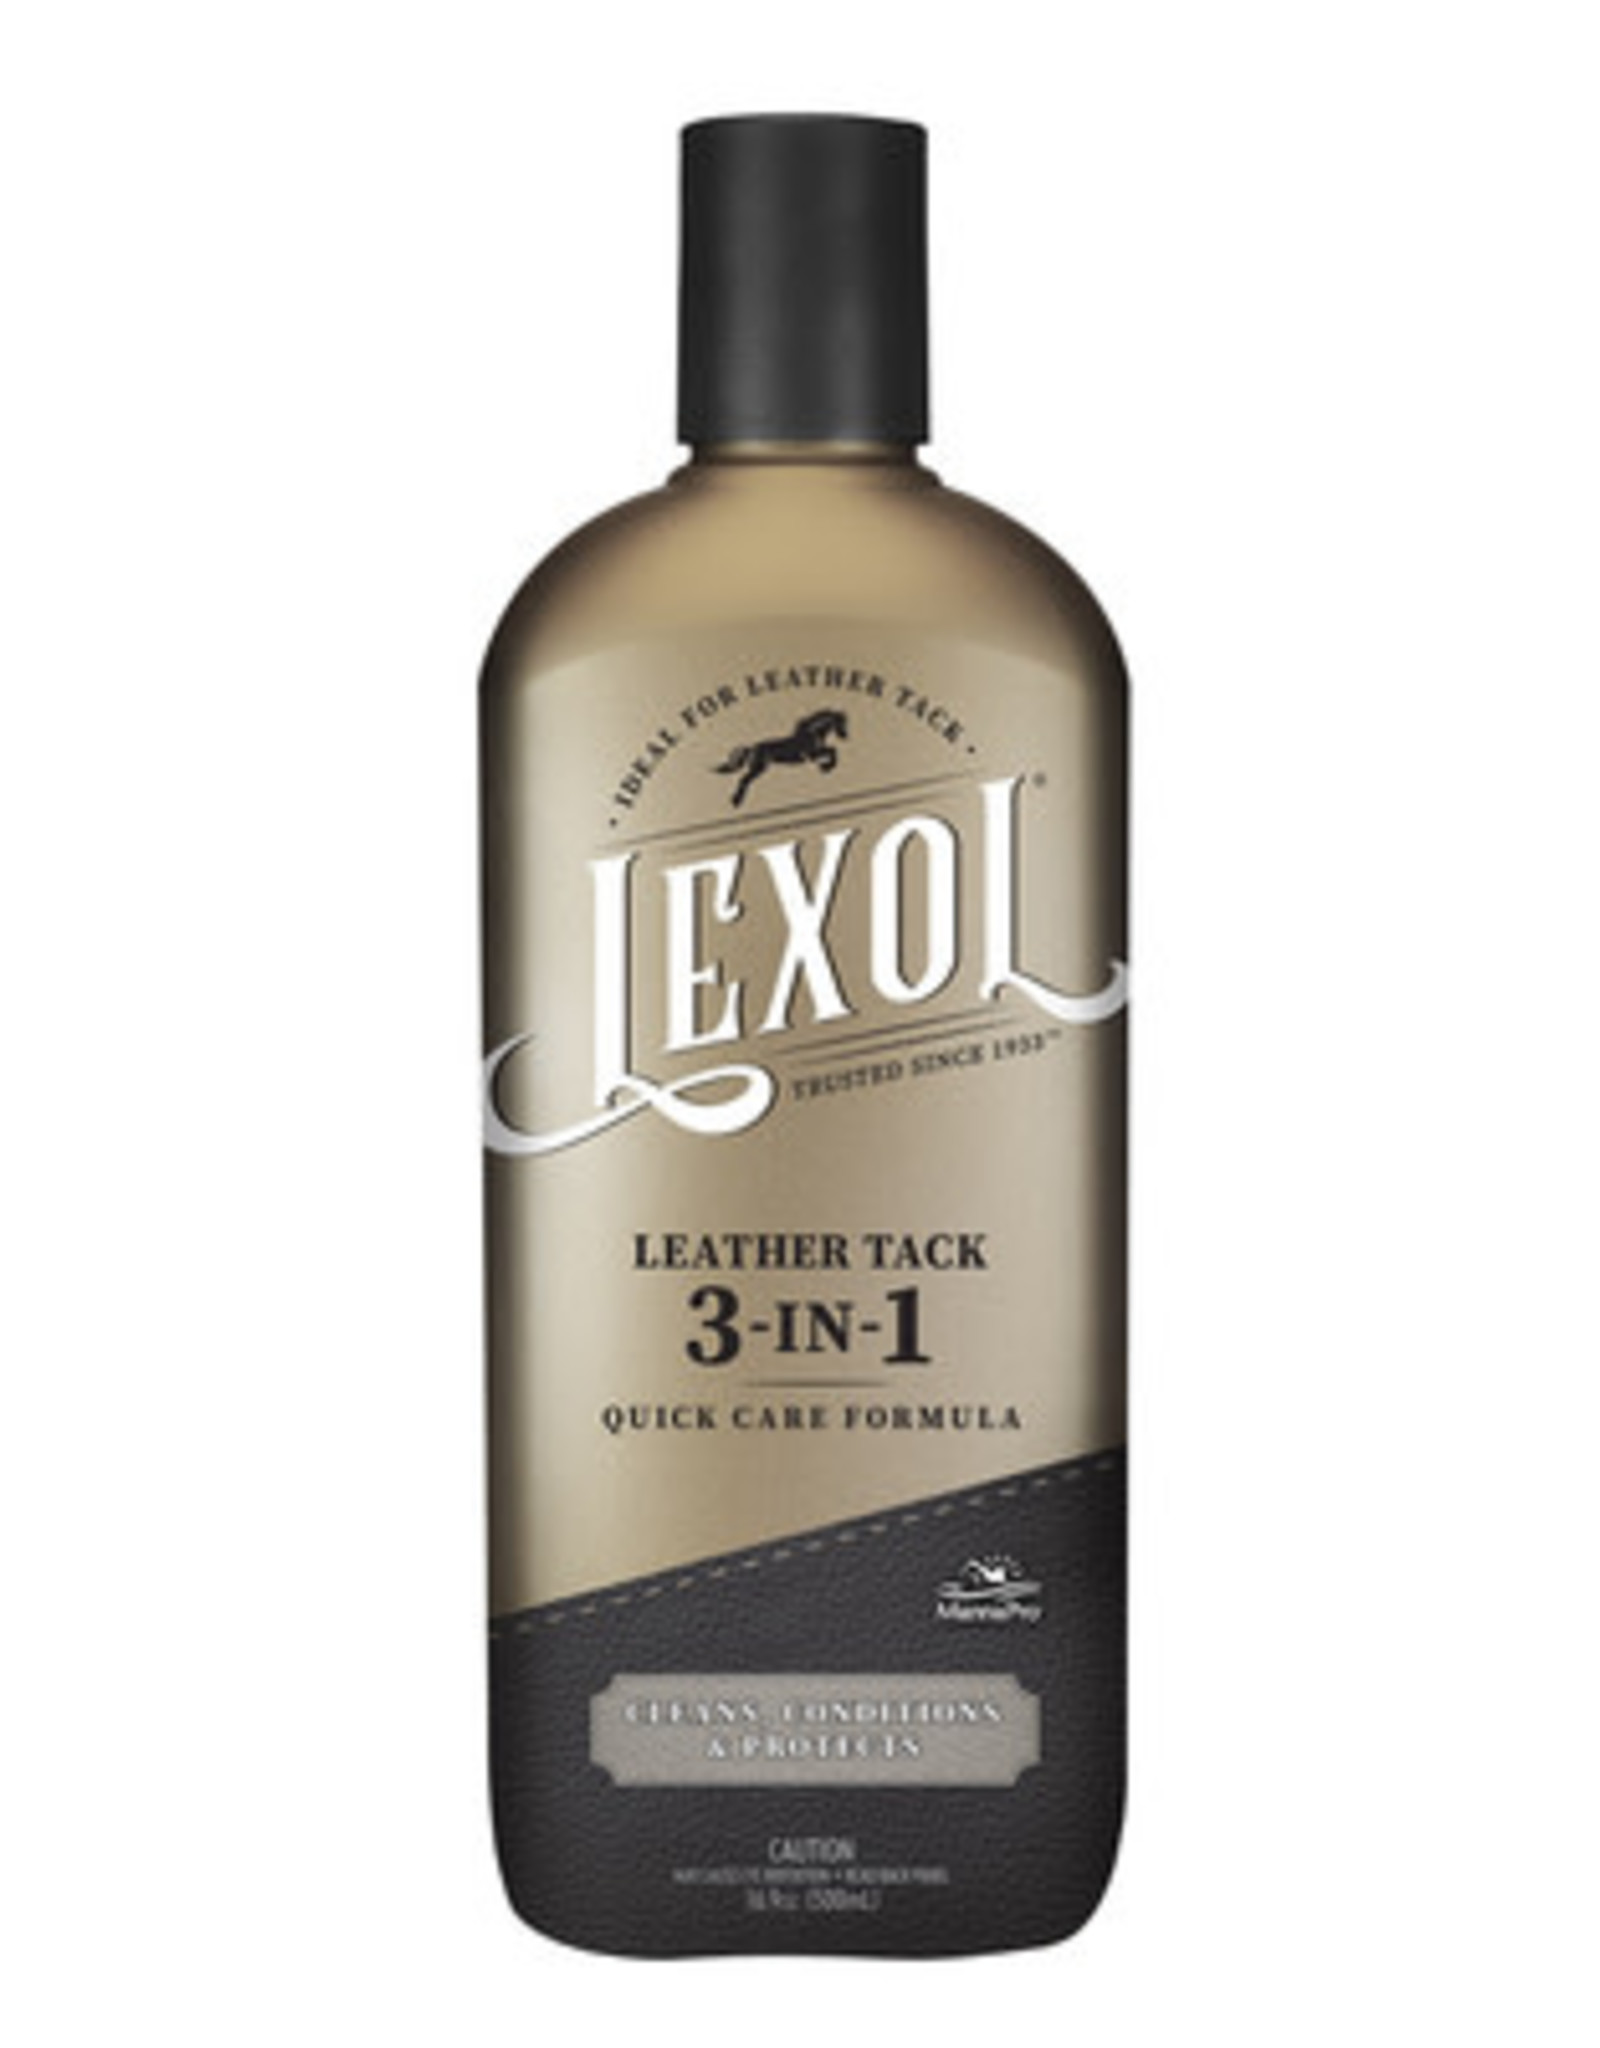 Lexol Leather tack 3in1 quick care 16.9oz